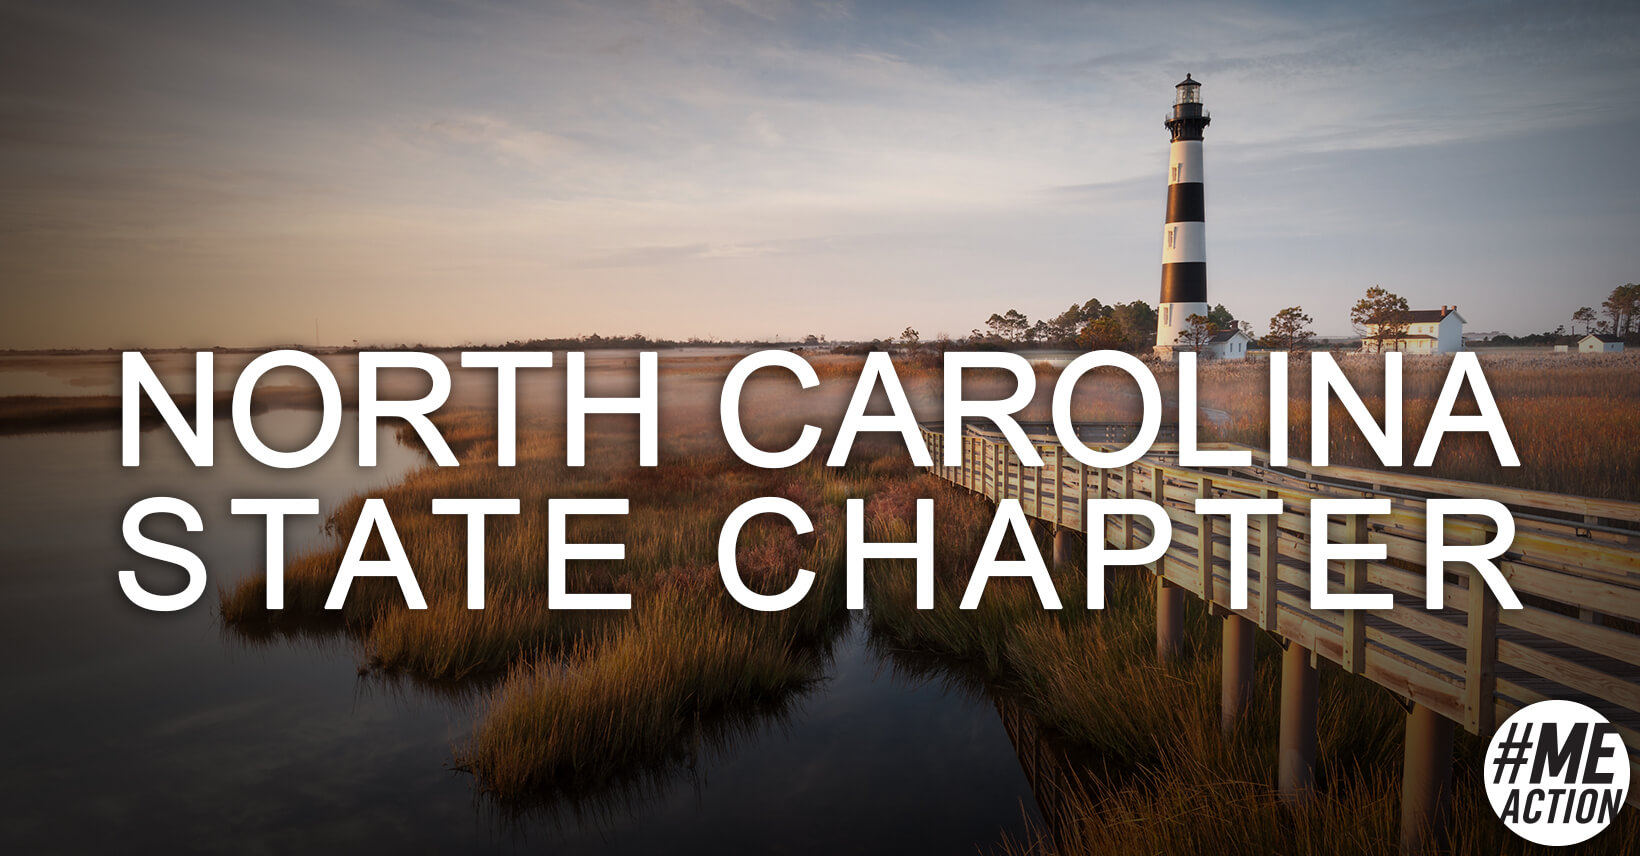 Wording on image: North Carolina State Chapter in white overlaying an image of a marsh with a lighthouse. The #MEAction logo in the bottom righthand corner